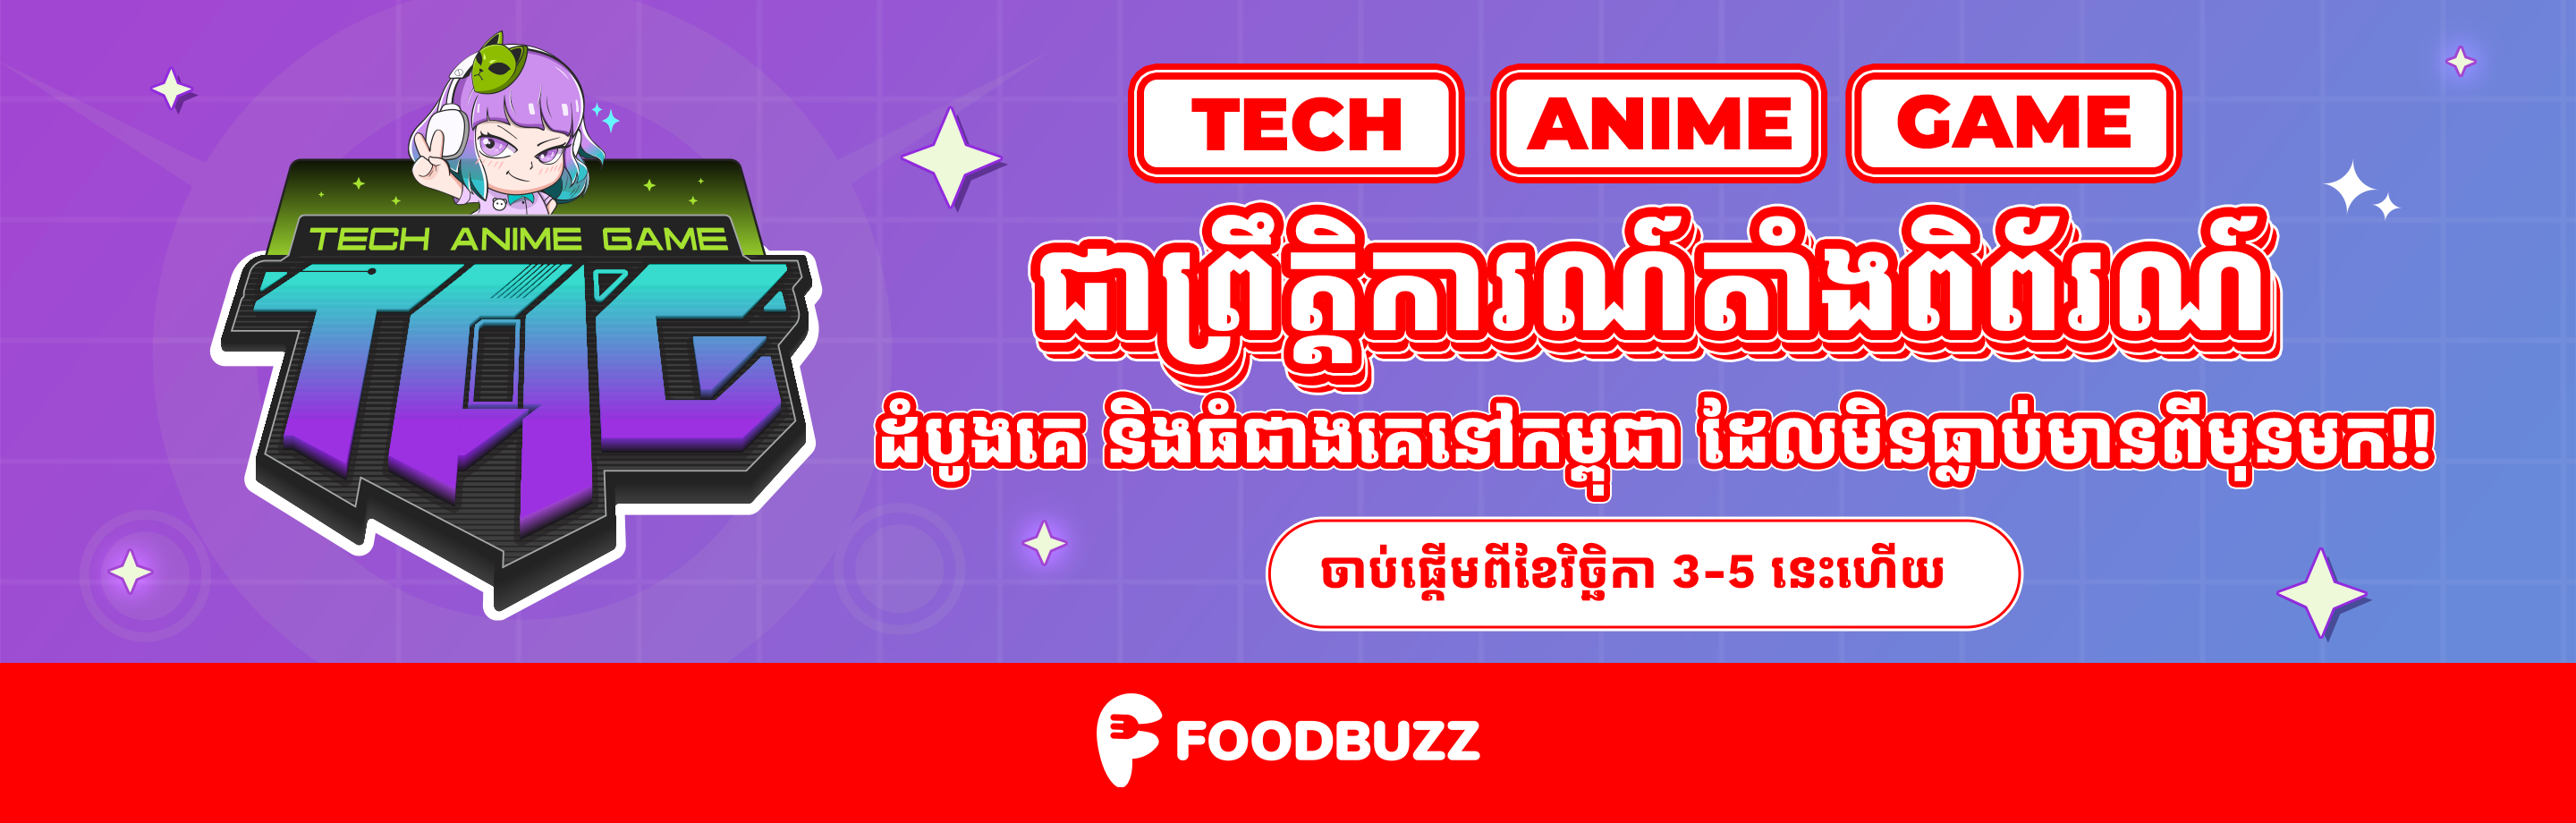 TAG - Cambodia's first and biggest community event focused on Tech